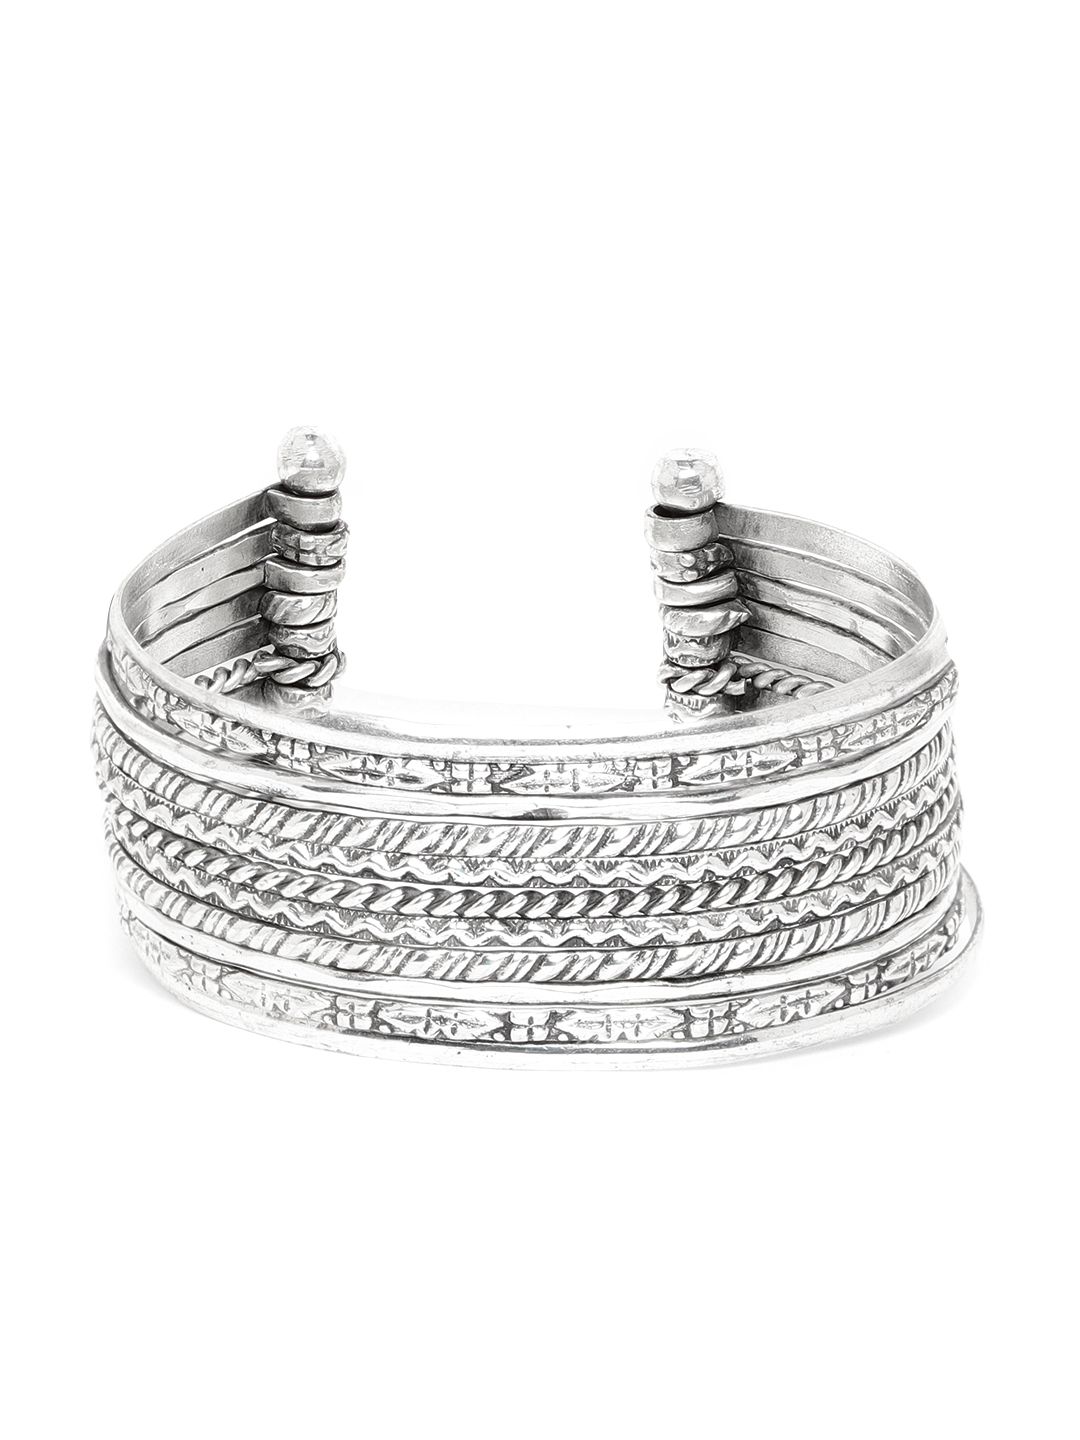 RICHEERA Oxidised Silver-Plated Textured Cuff Bracelet Price in India